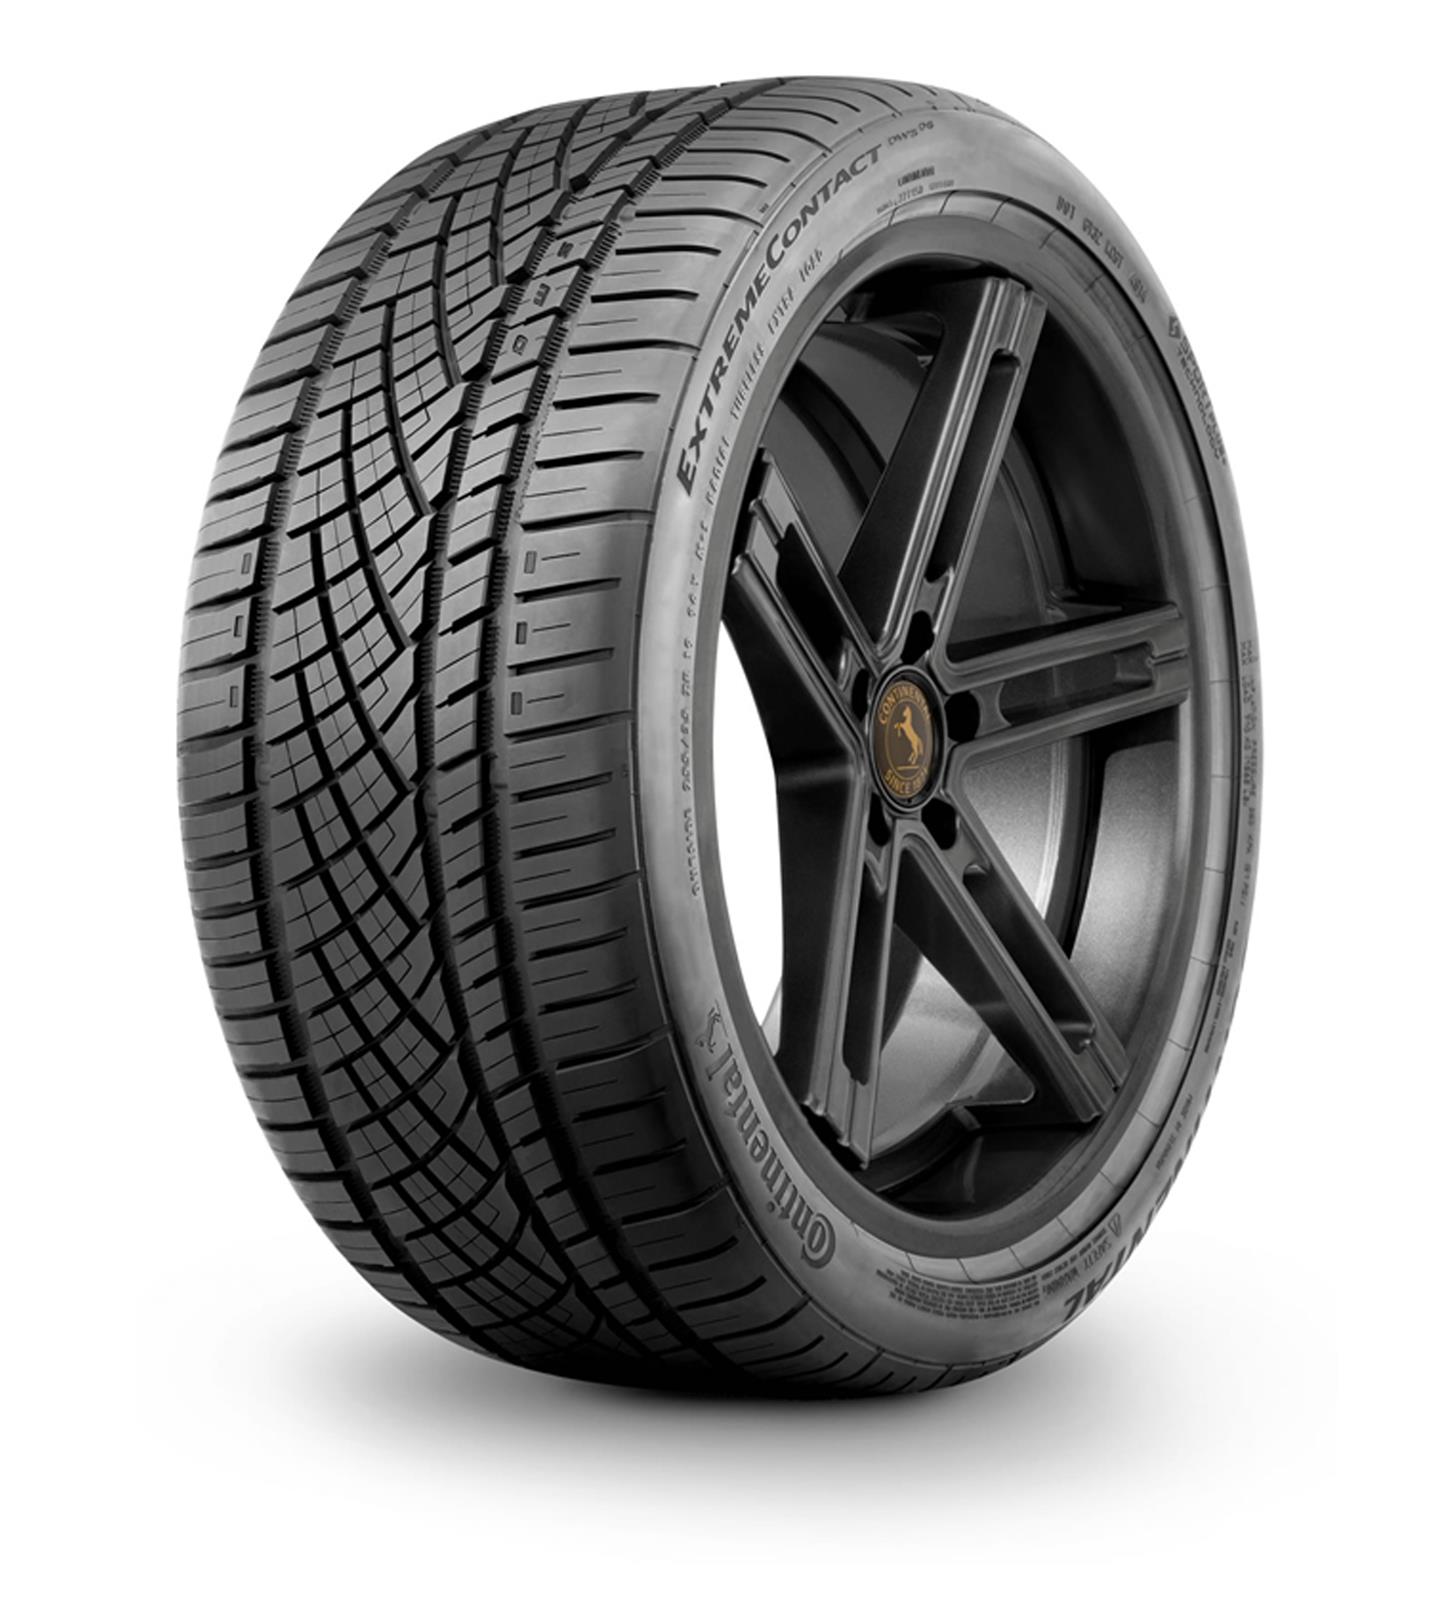 Continental Tire 15499770000 Continental ExtremeContact DWS06 Tires 